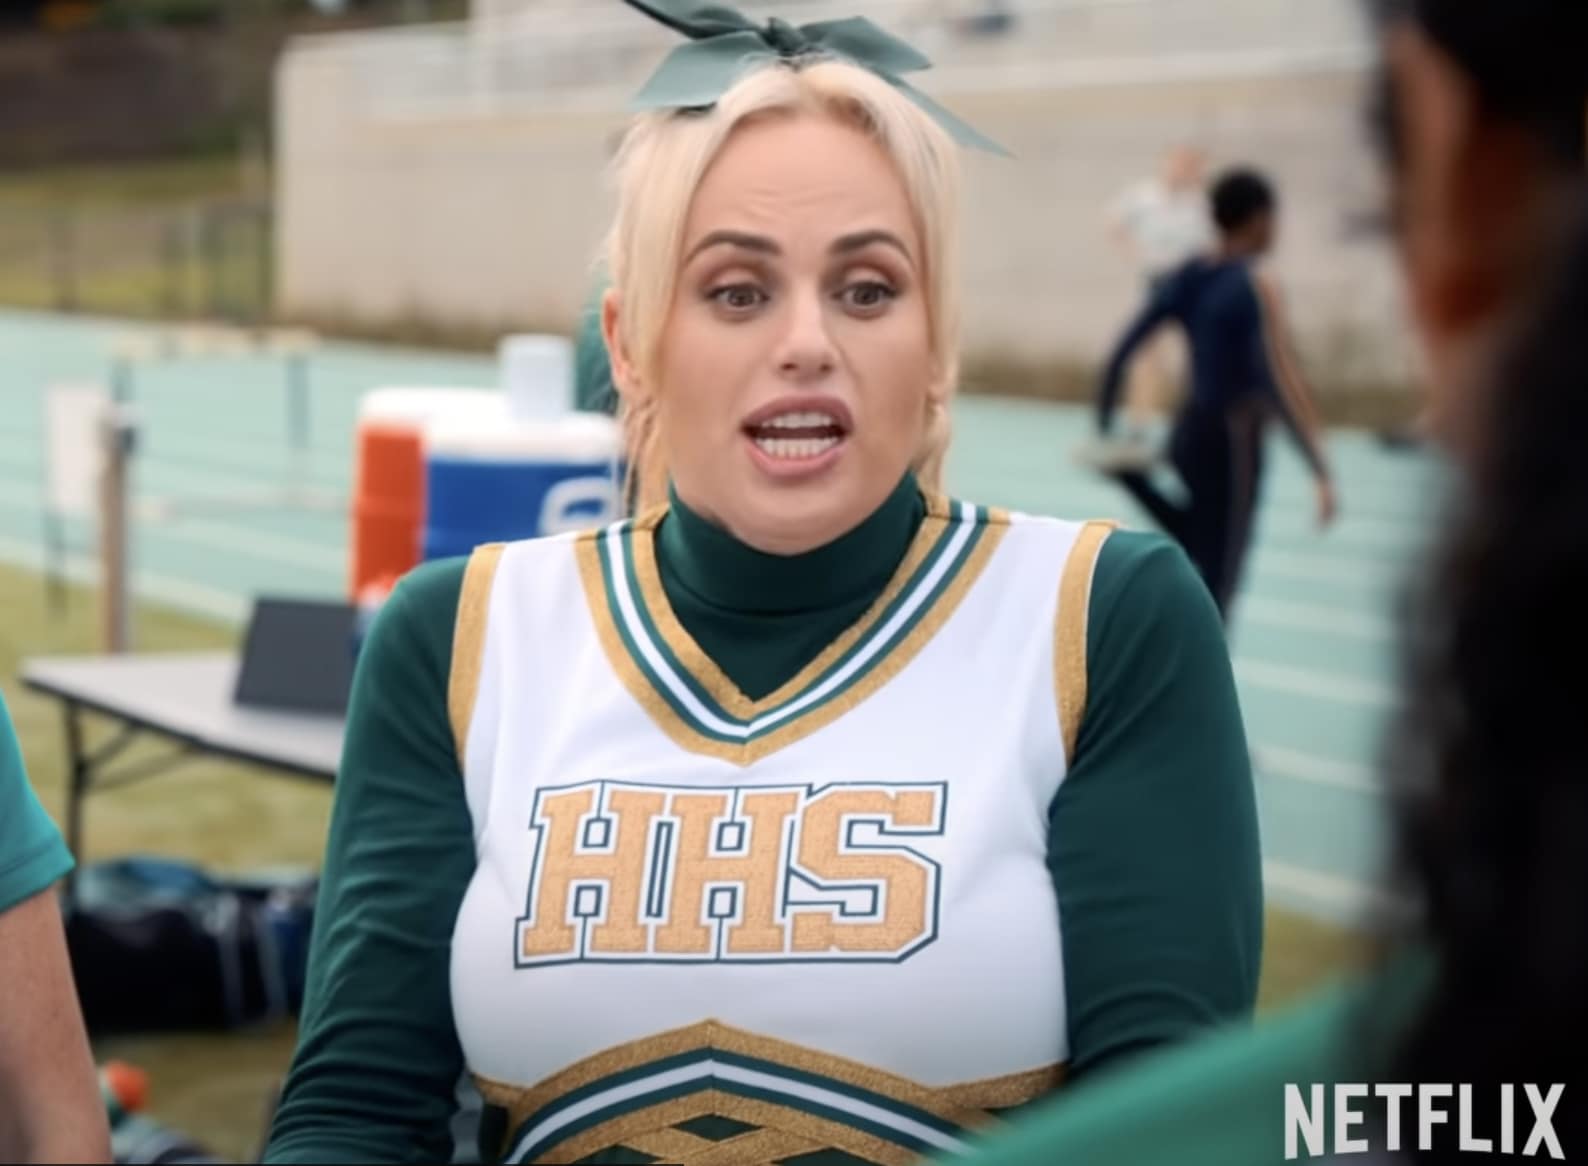 Rebel Wilson stars as a cheer captain Stephanie Conway in the new Netflix movie Senior Year